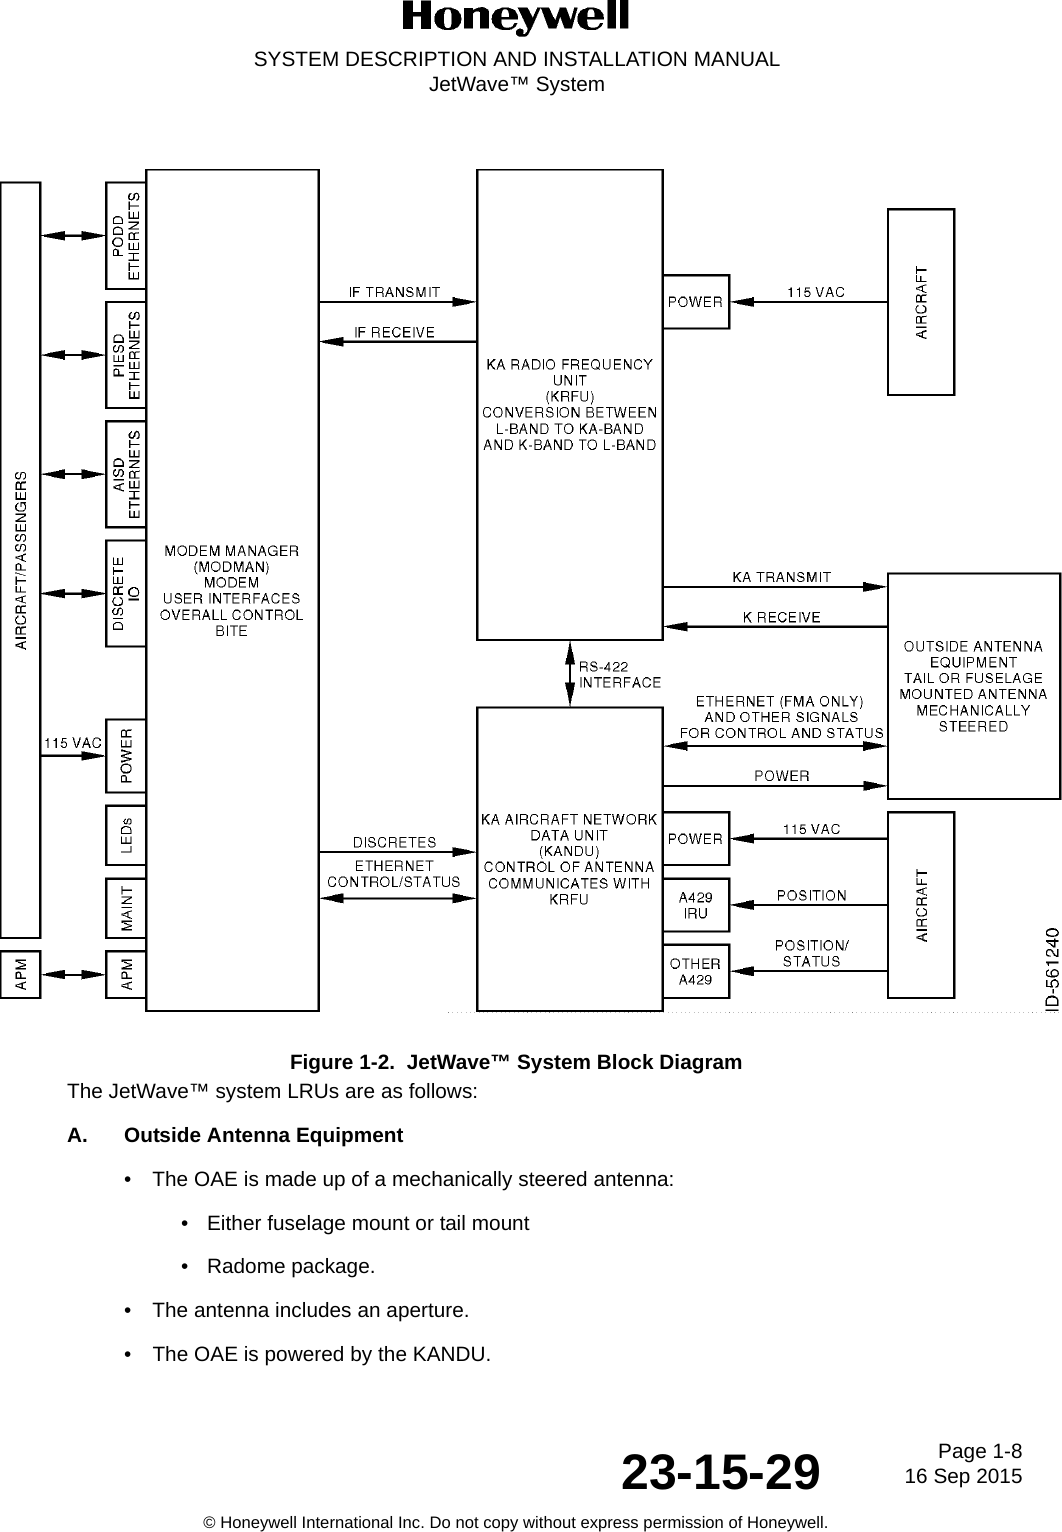 Page 1-816 Sep 201523-15-29SYSTEM DESCRIPTION AND INSTALLATION MANUALJetWave™ System© Honeywell International Inc. Do not copy without express permission of Honeywell.Figure 1-2.  JetWave™ System Block DiagramThe JetWave™ system LRUs are as follows:A. Outside Antenna Equipment• The OAE is made up of a mechanically steered antenna:• Either fuselage mount or tail mount• Radome package.• The antenna includes an aperture.• The OAE is powered by the KANDU.